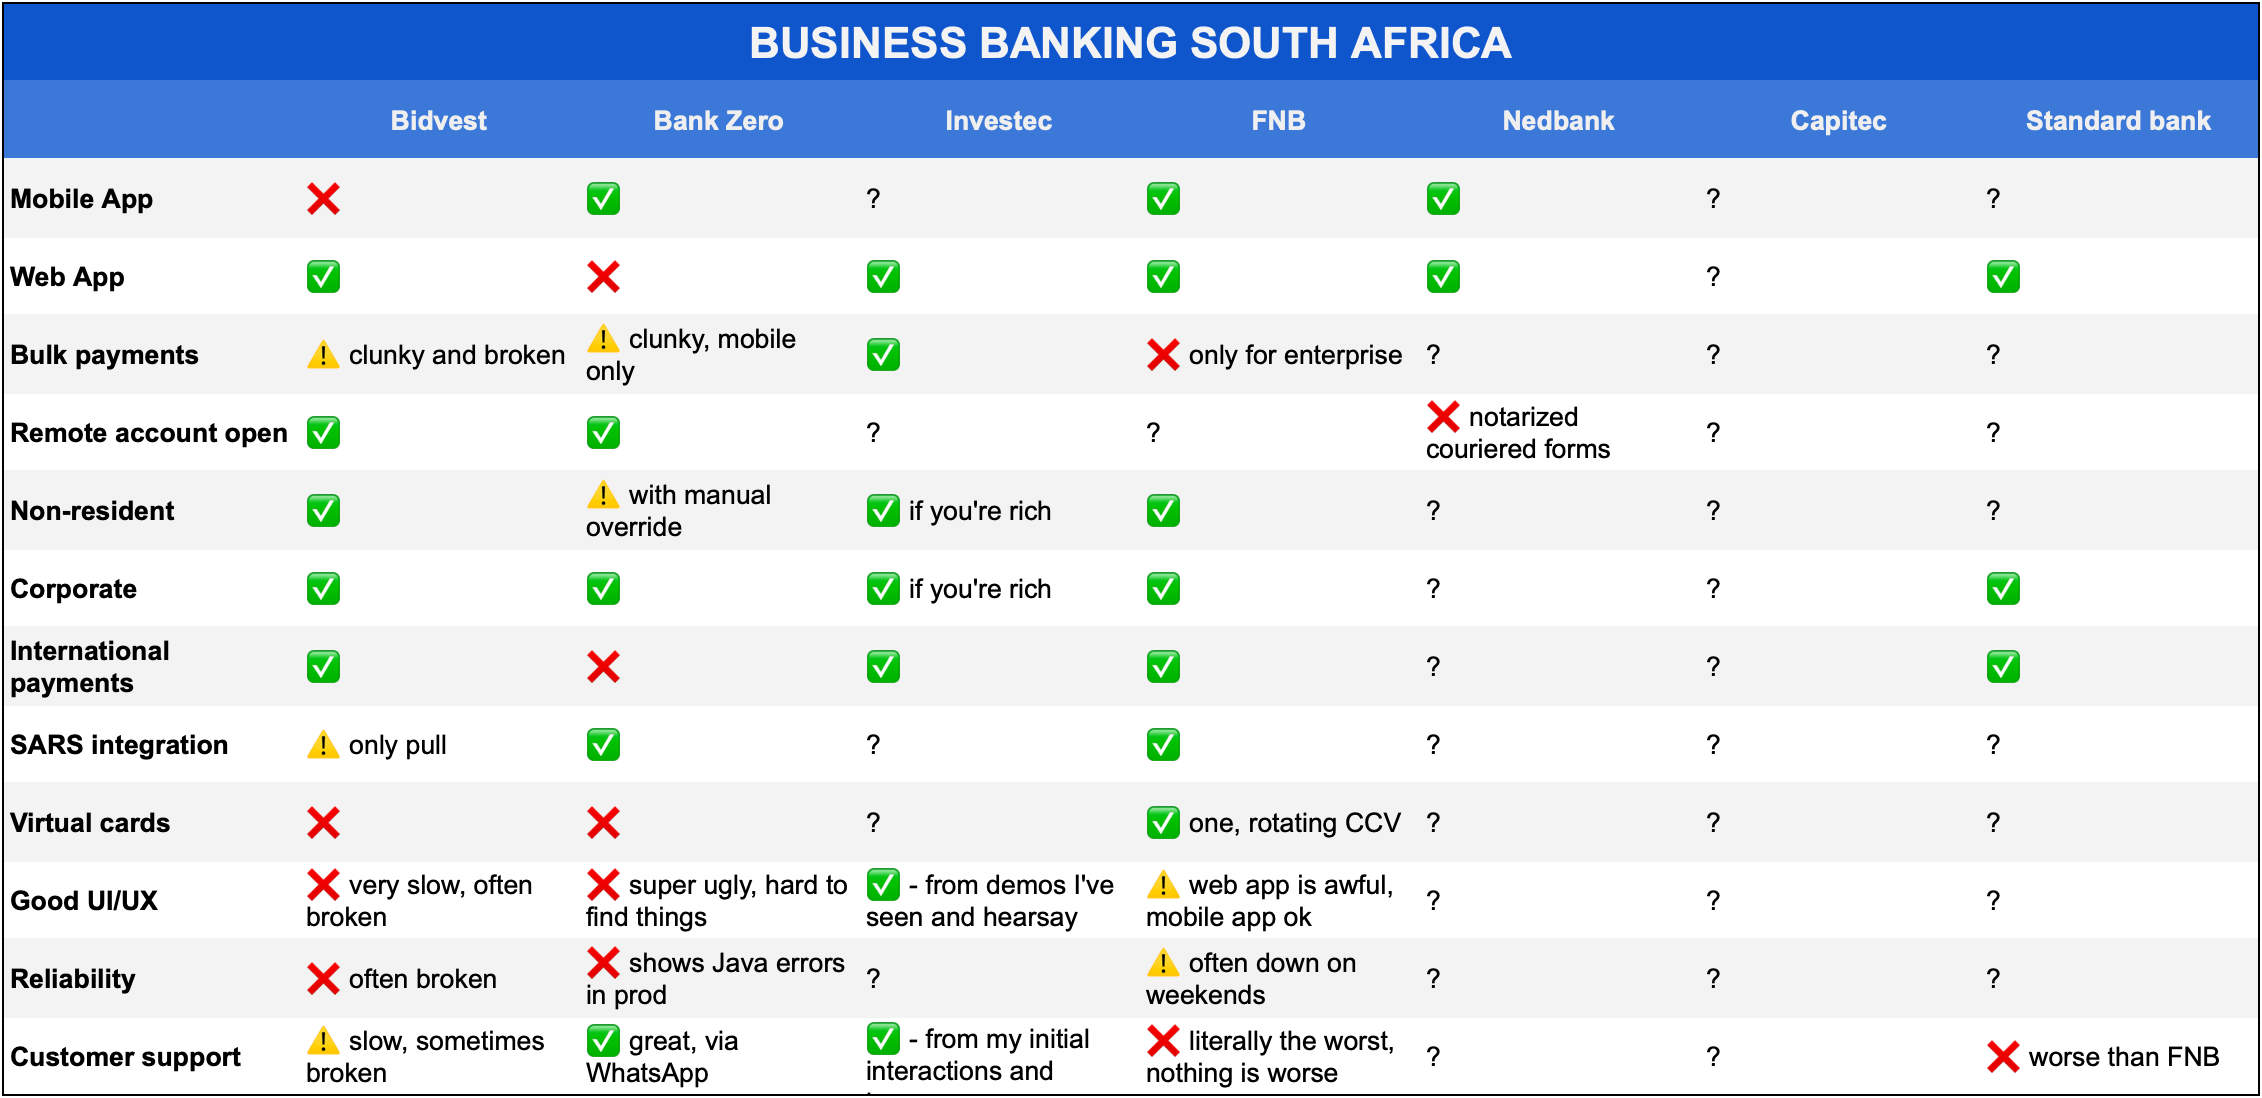 Business banks compared in South Africa